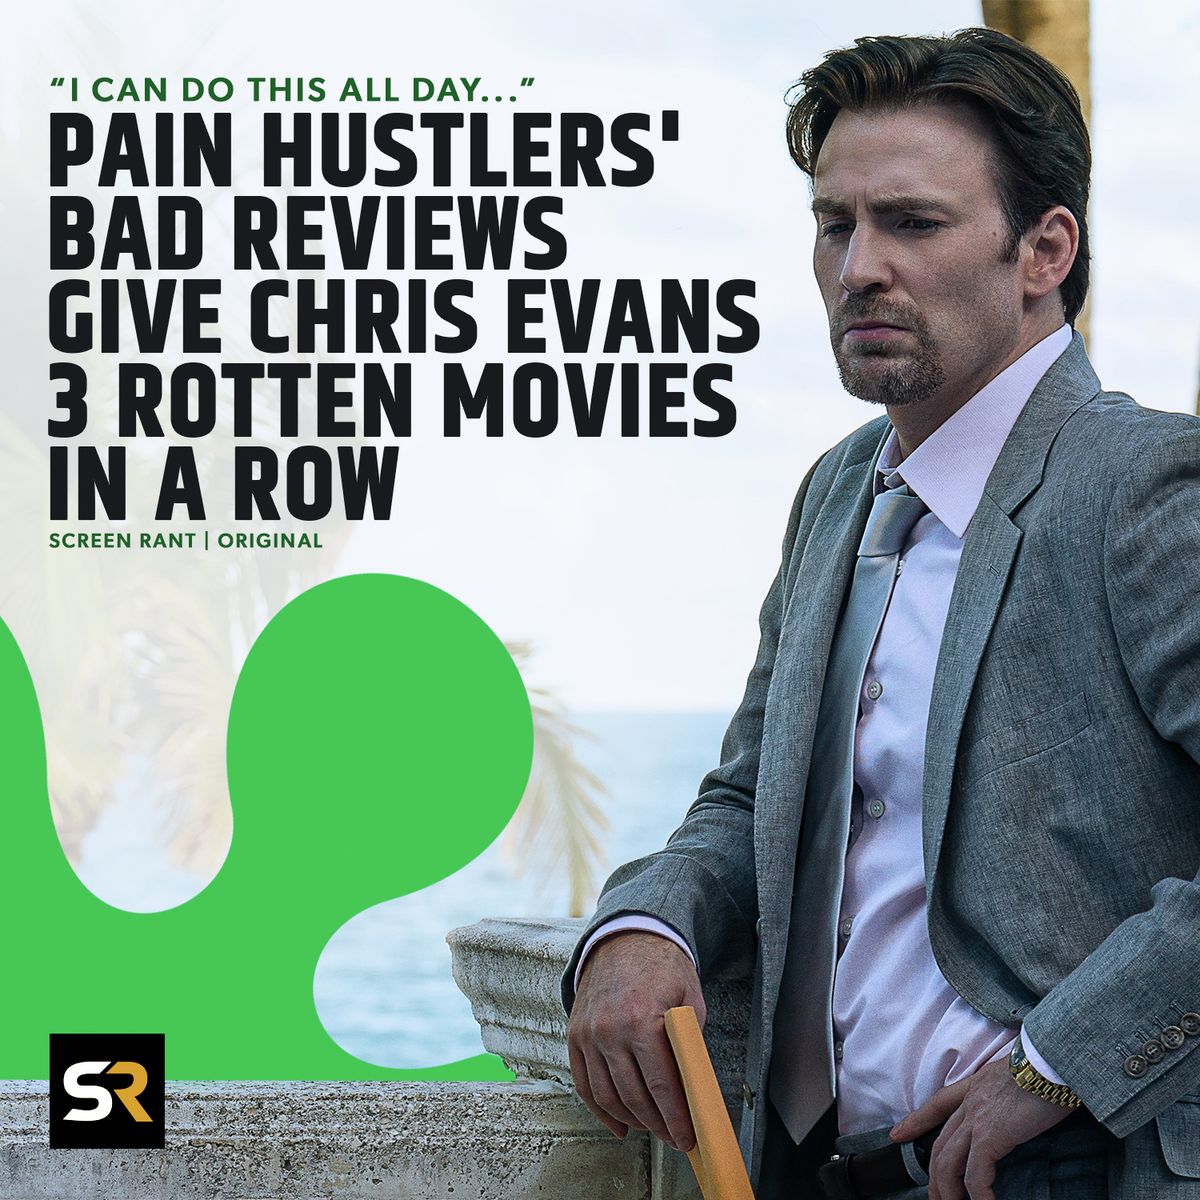 Screen Rant on X: Pain Hustlers is Chris Evans' third consecutive rotten  movie, marking his worst streak since 2010. 🍿 The movies in this streak,  including The Gray Man (45% score) and